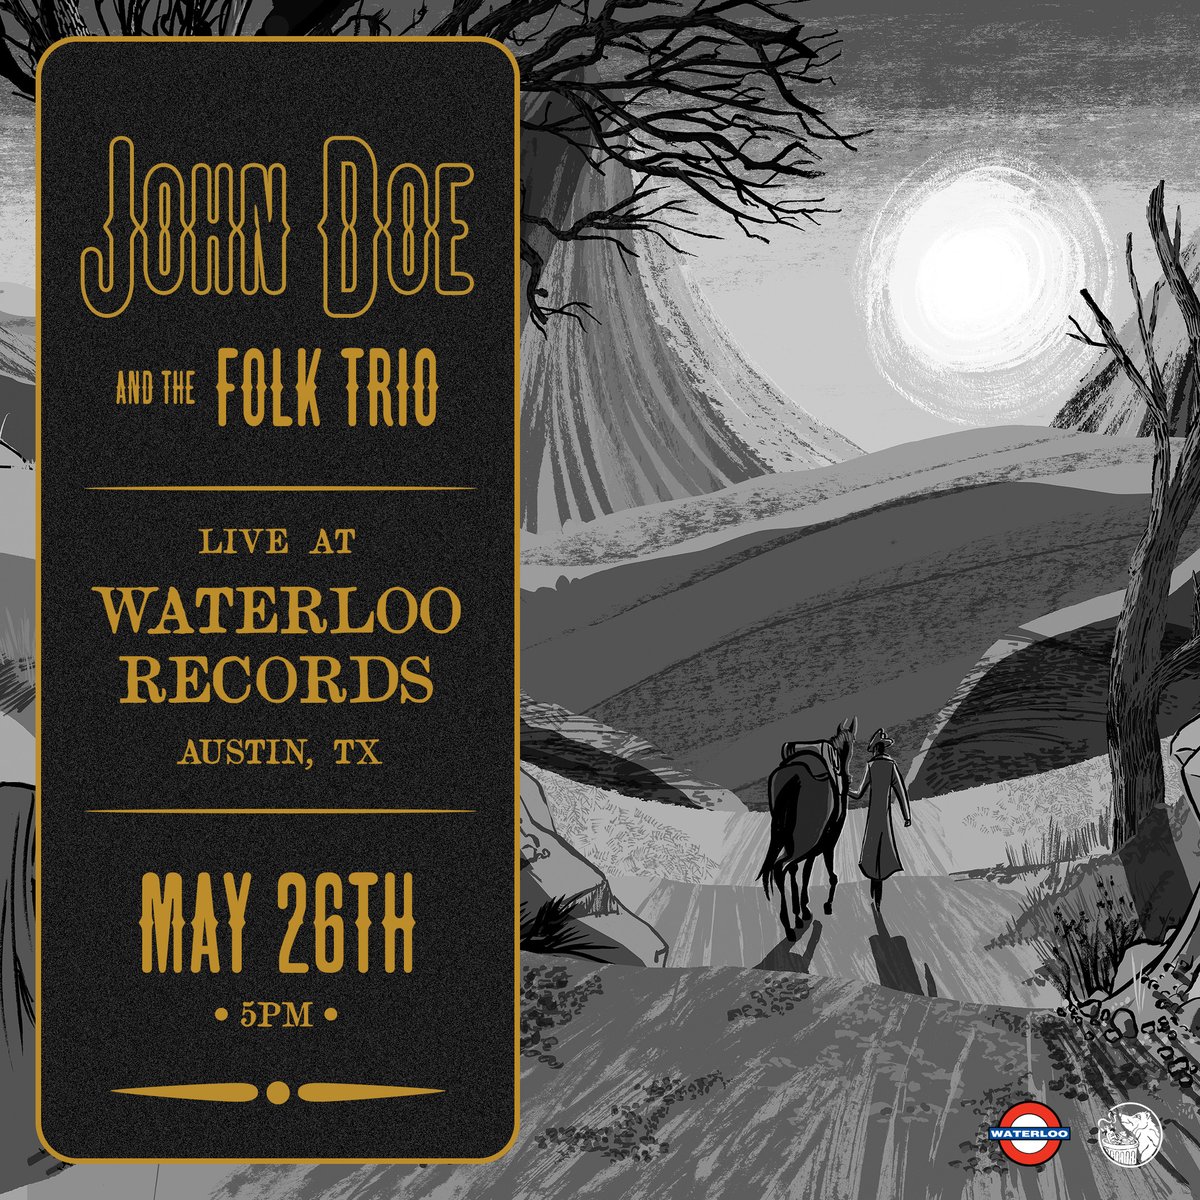 Hey Austin.. the JD Folk Trio will stop by @WaterlooRecords to play a few songs on May 26.. hope to see you there!